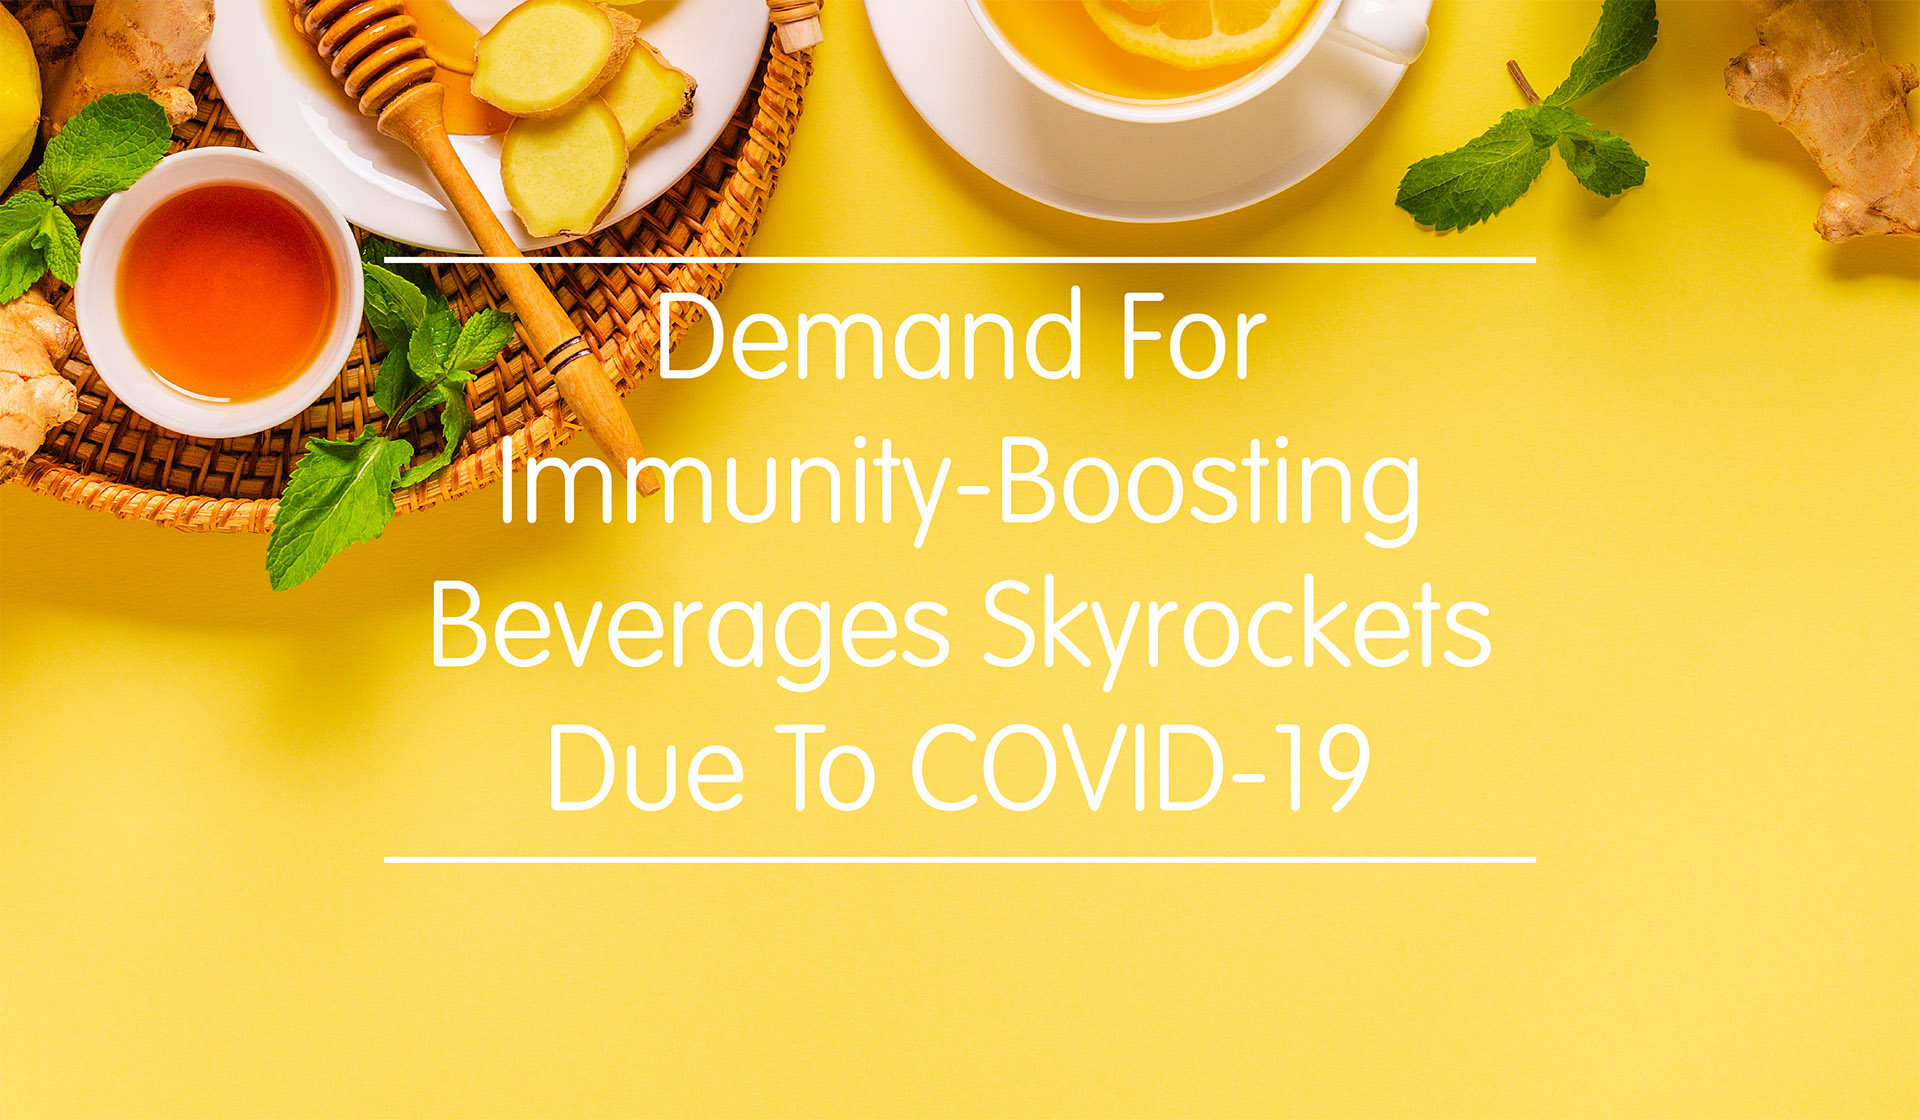 Demand For Immunity-Boosting Beverages Skyrockets Due To COVID-19